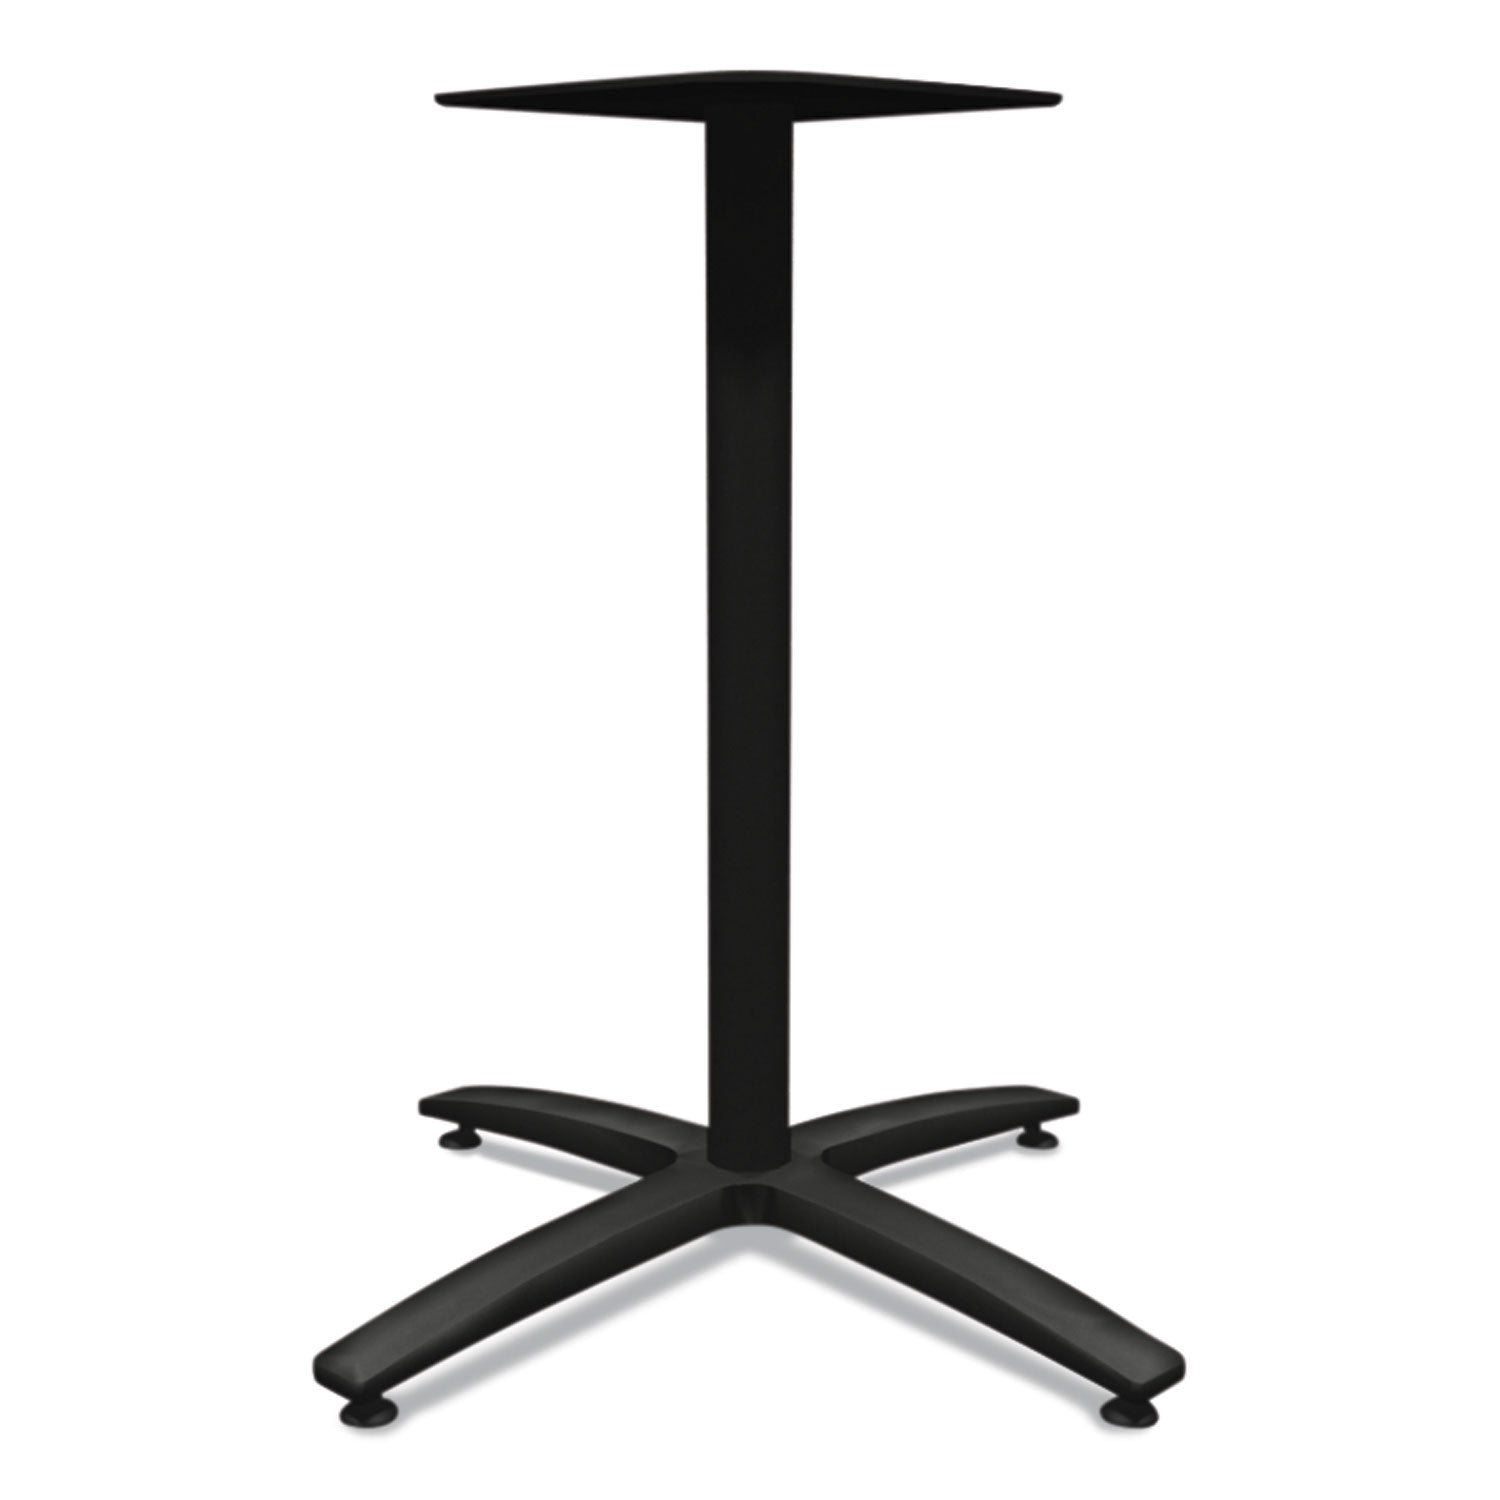 between-seated-height-x-base-for-30-to-36-table-tops-2618w-x-2957h-black_honbtx30scbk - 2